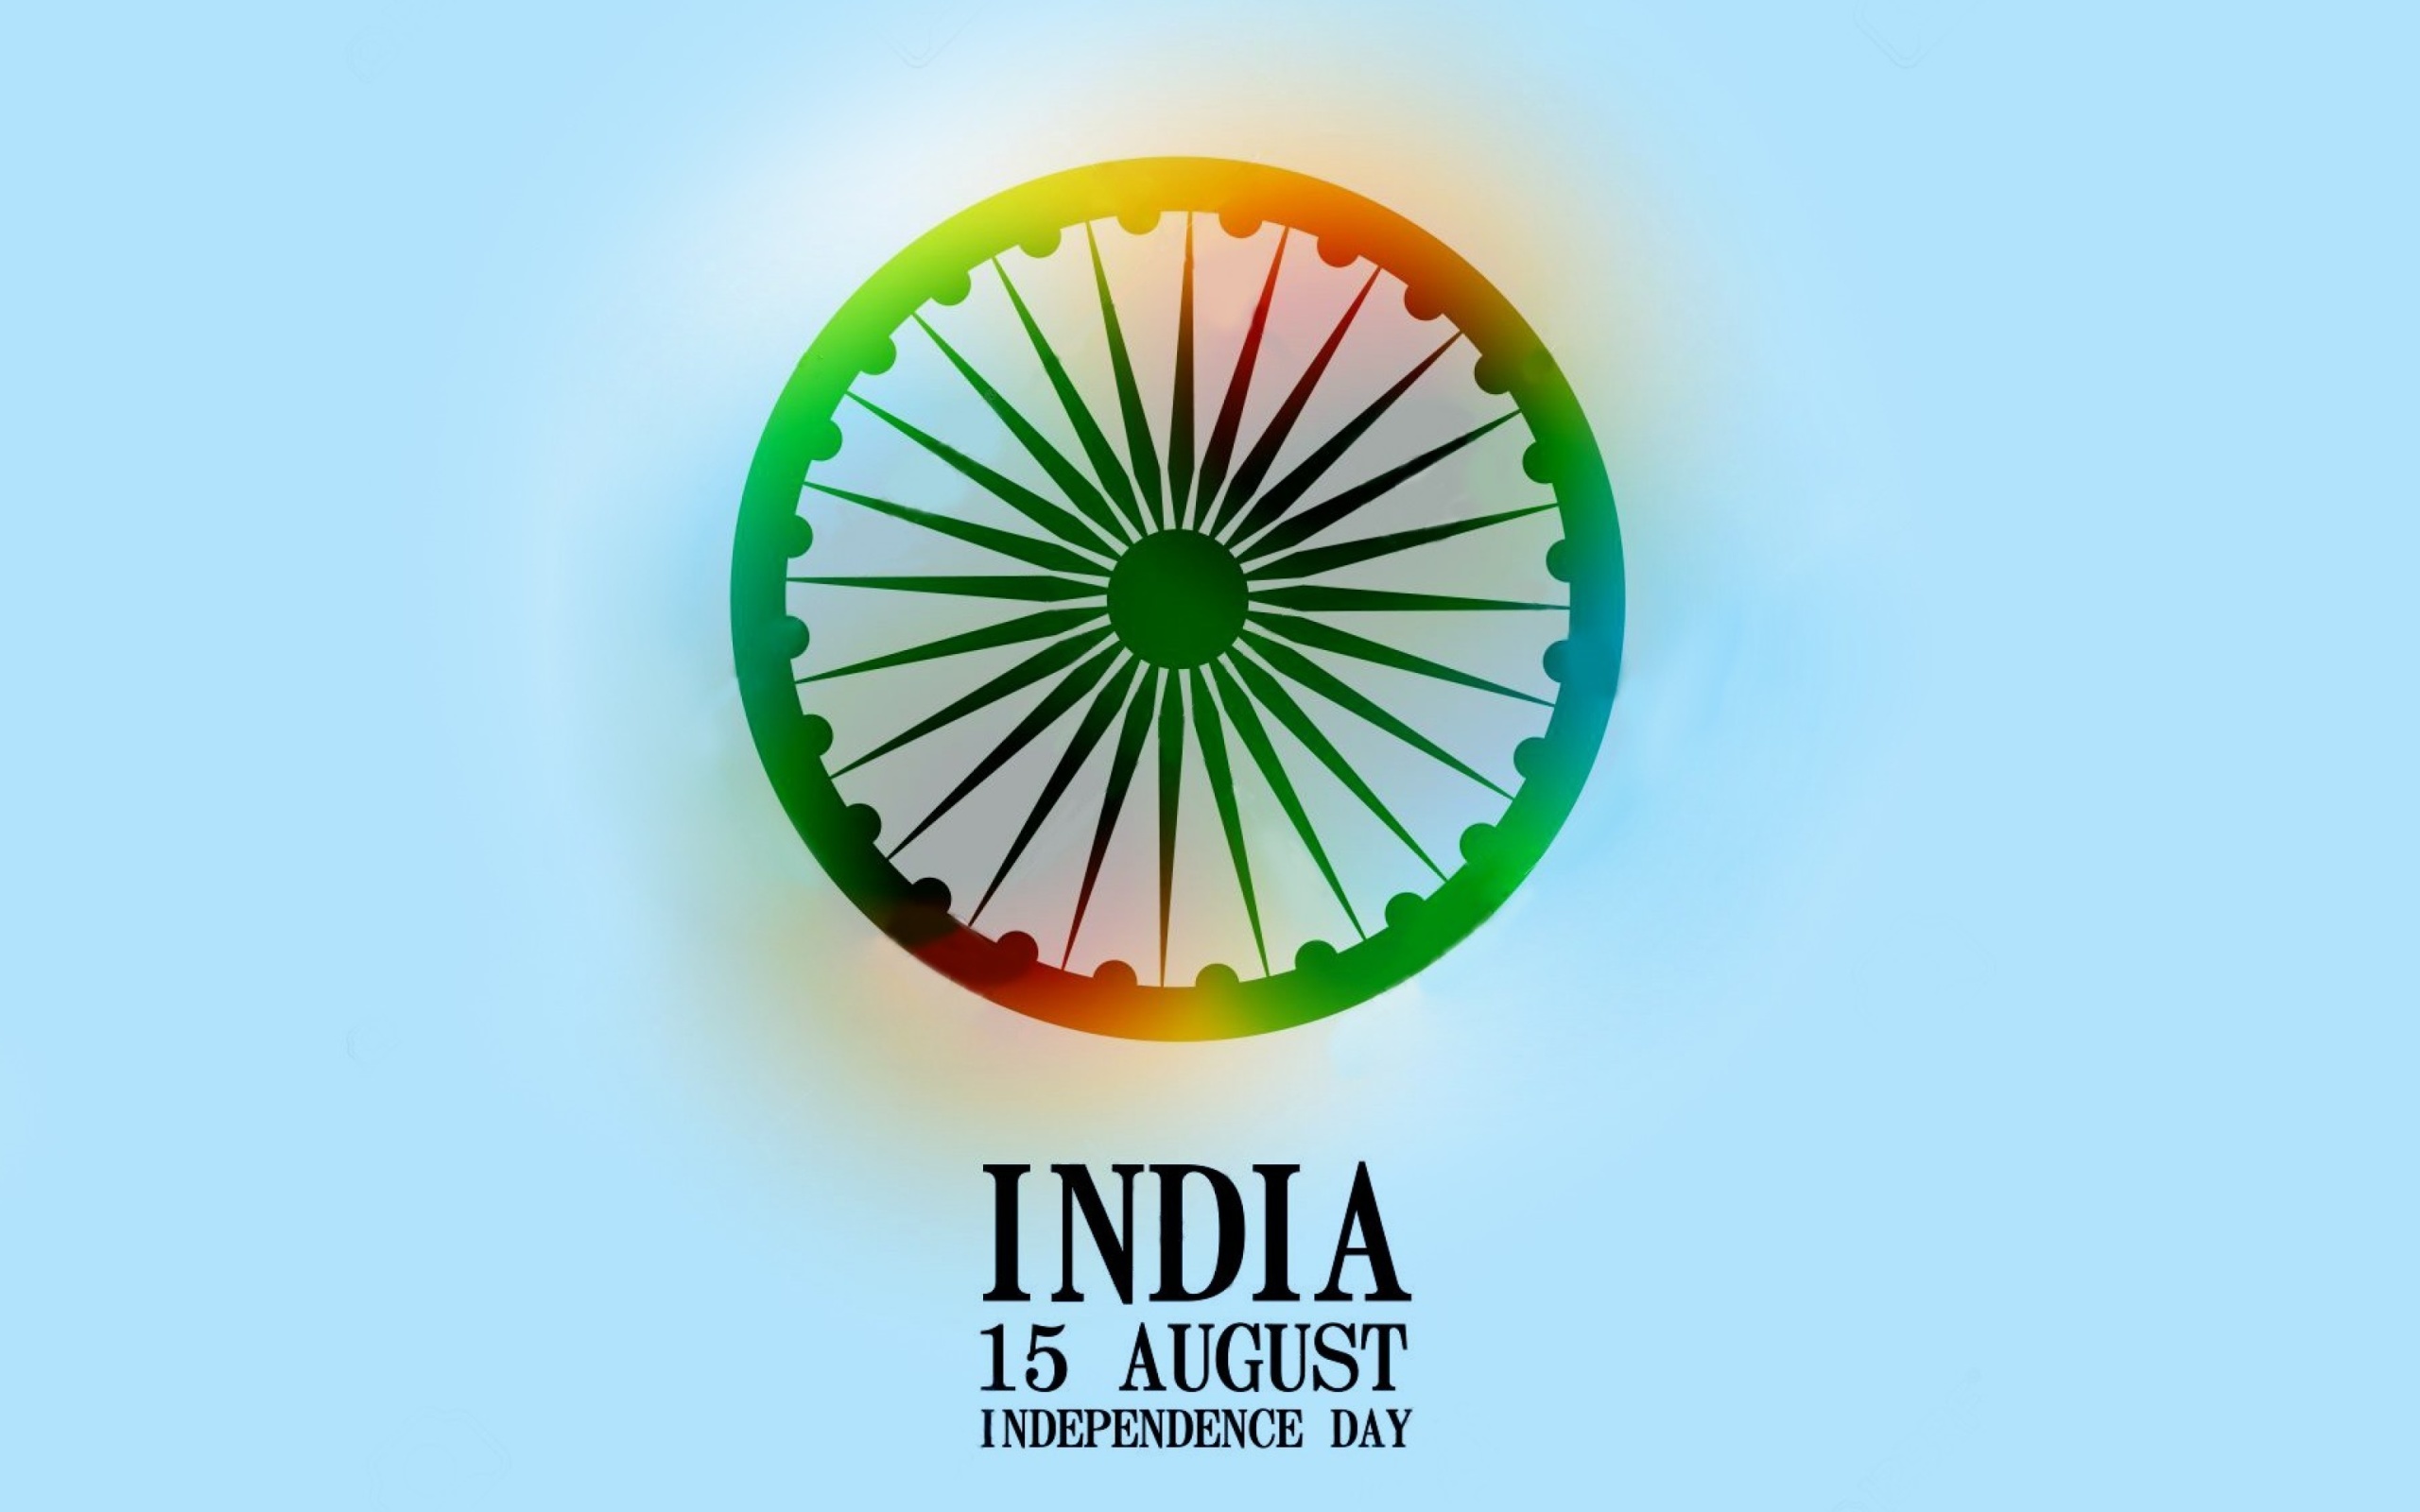 India Independence Day 15 August screenshot #1 2560x1600